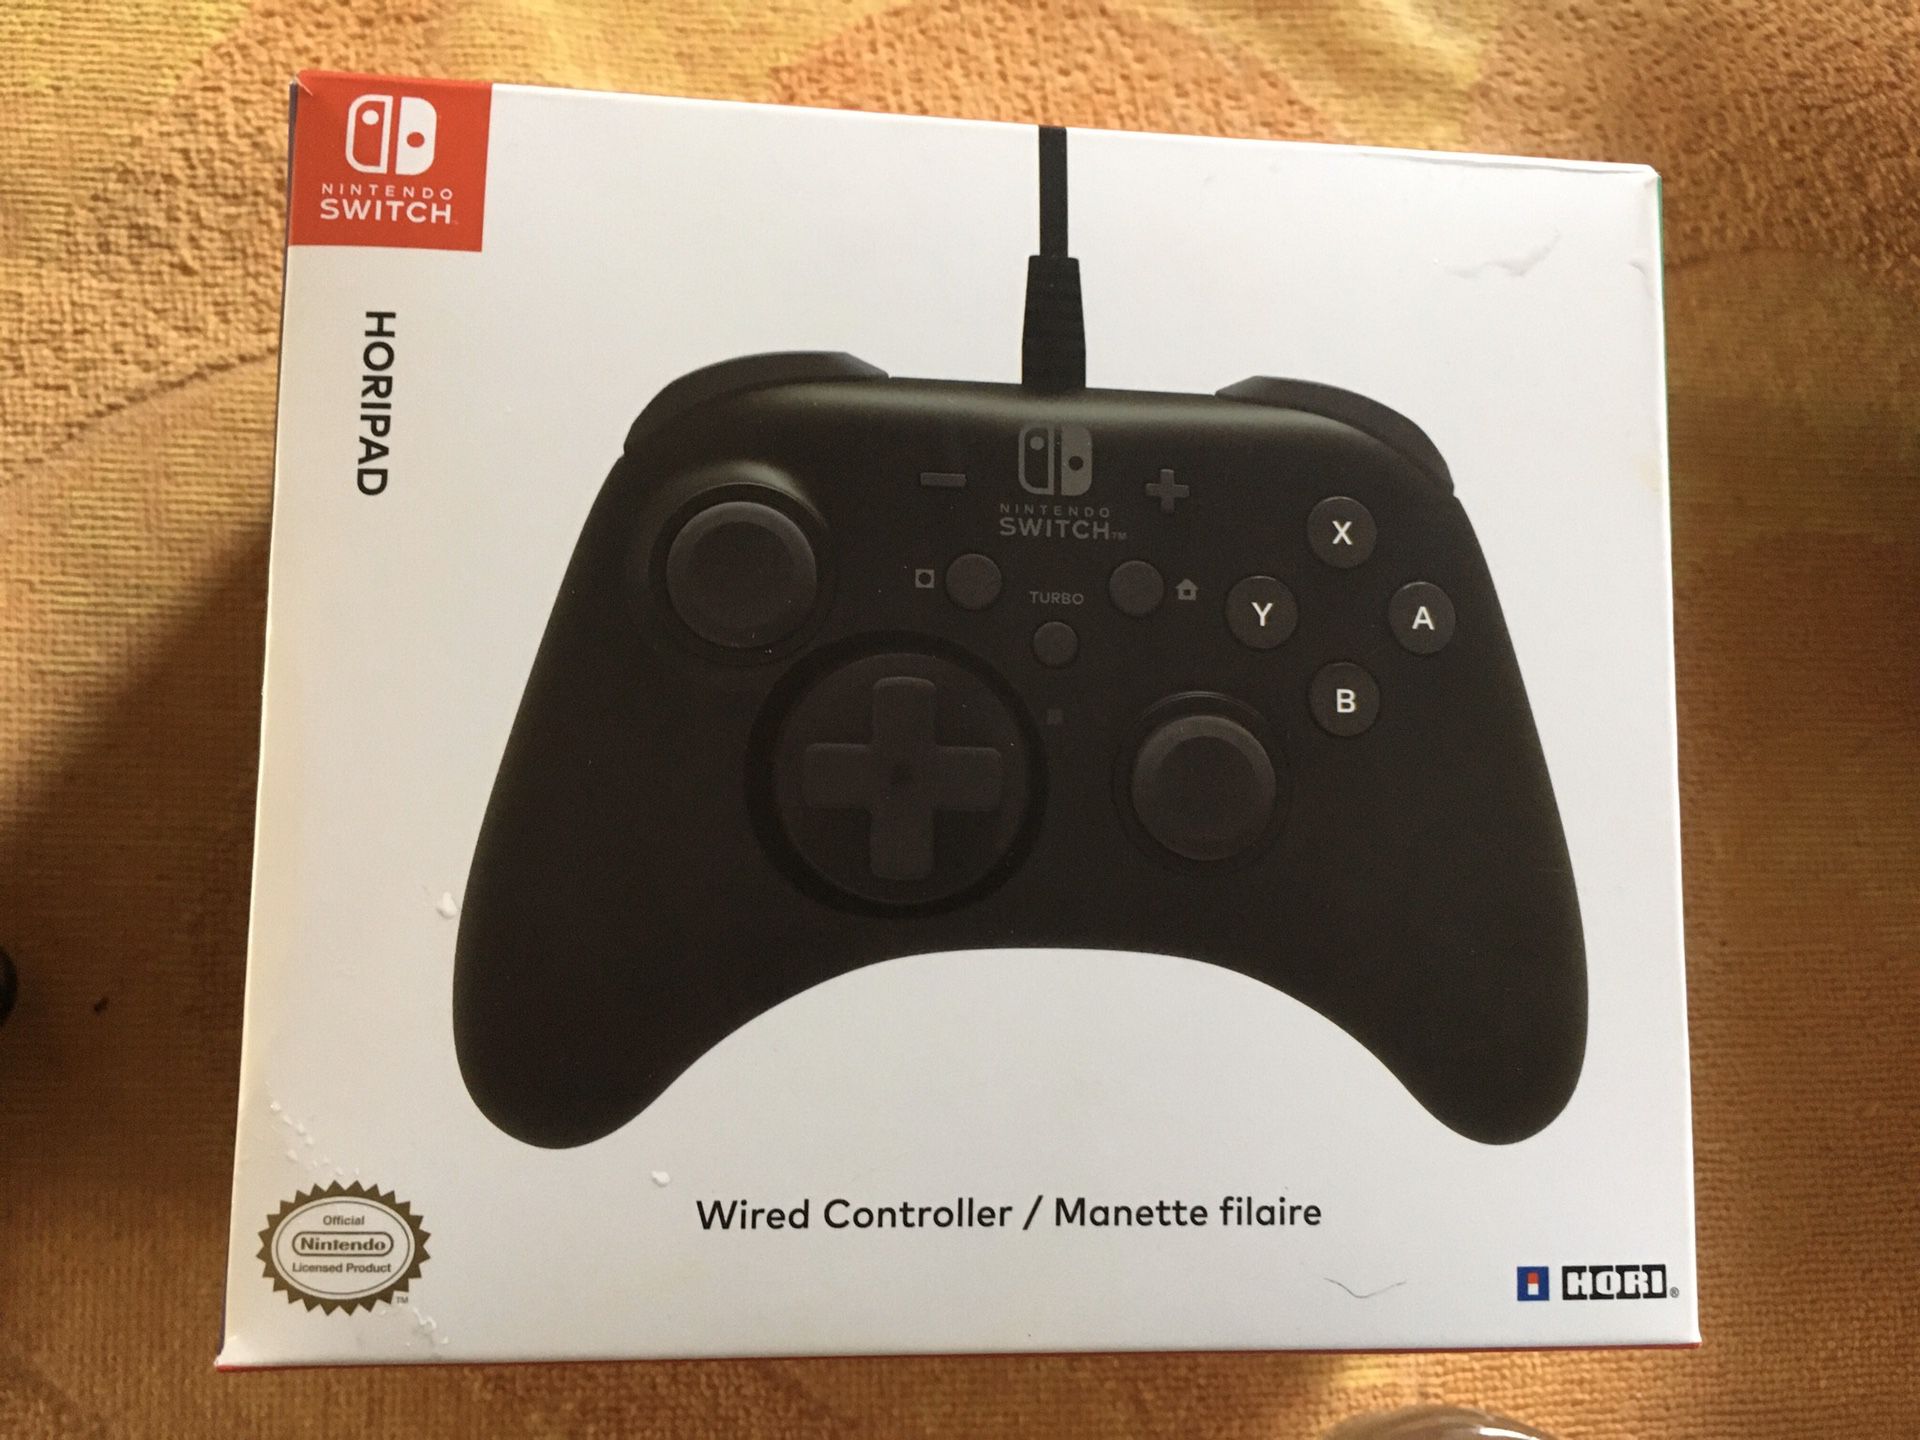 HORI Nintendo Switch HORIPAD Wired Controller - Price is Negotiable